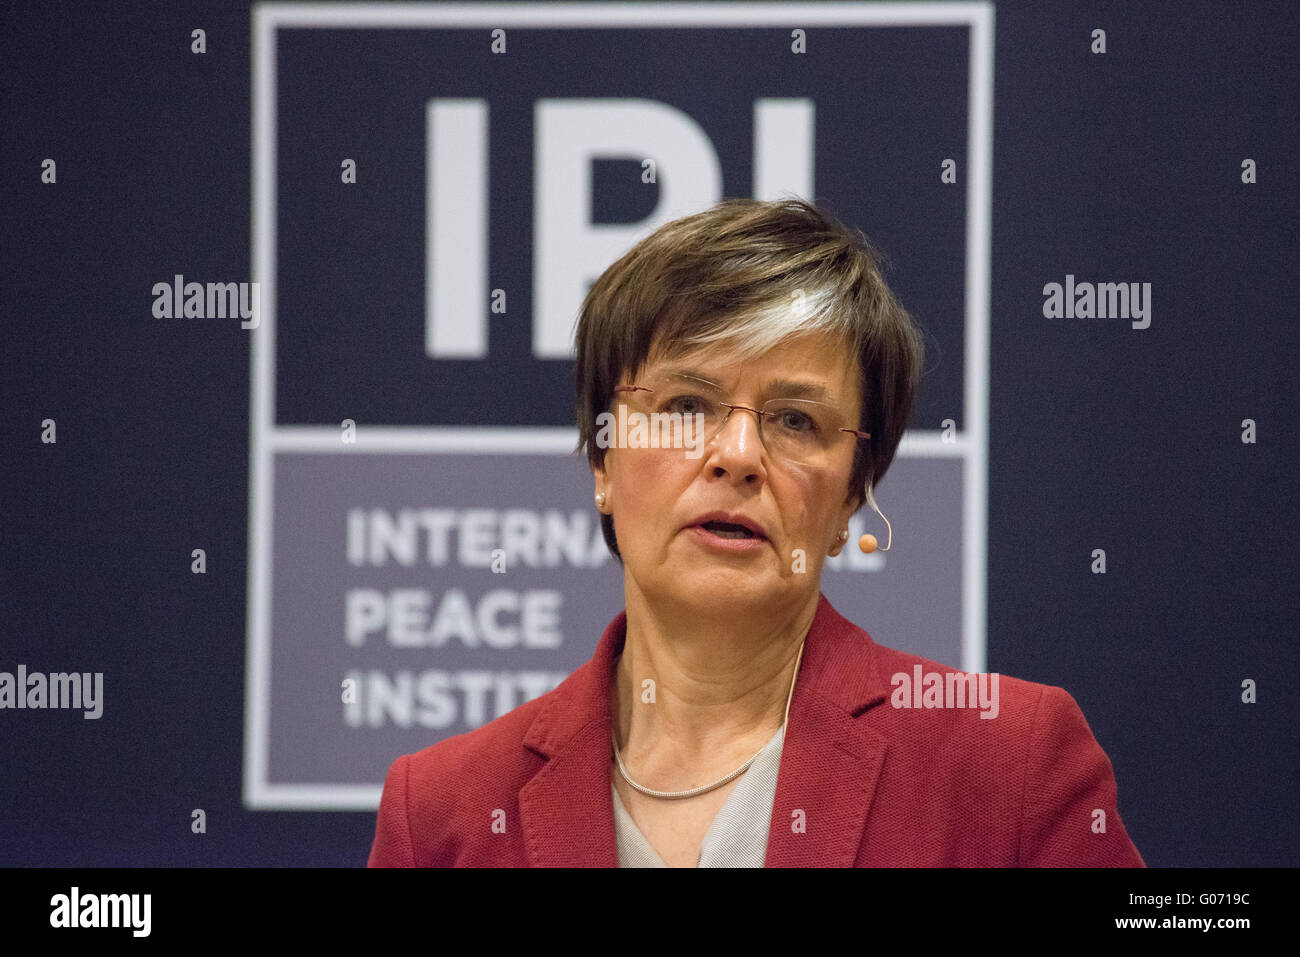 New York, United States. 29th Apr, 2016. Astrid Thors speaks to t he the International Peace Institute. At a discussion organized by the International Peace Institute, Astrid Thors, High Commissioner on National Minorities for the Organization for Security and Cooperation in Europe, spoke about current refugee- and migrant-related issues in Europe and efforts by the OSCE to assist in protecting the rights of displaced persons who have settled in Europe. © Albin Lohr-Jones/Pacific Press/Alamy Live News Stock Photo